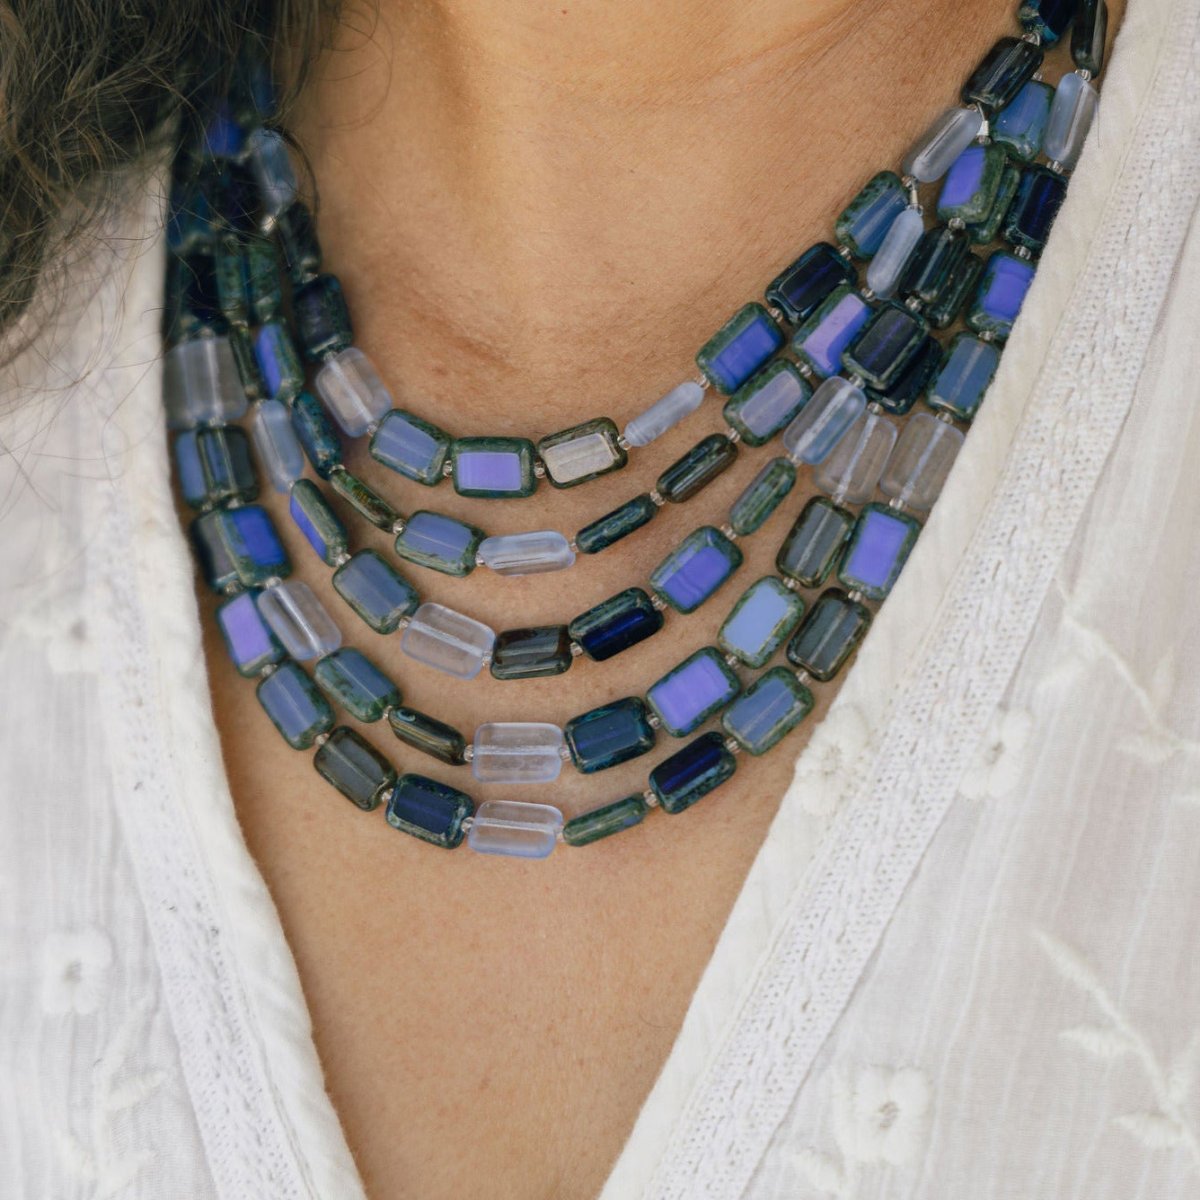 Long Statement Necklace - Handmade Jewelry South Beach Mix (MS)